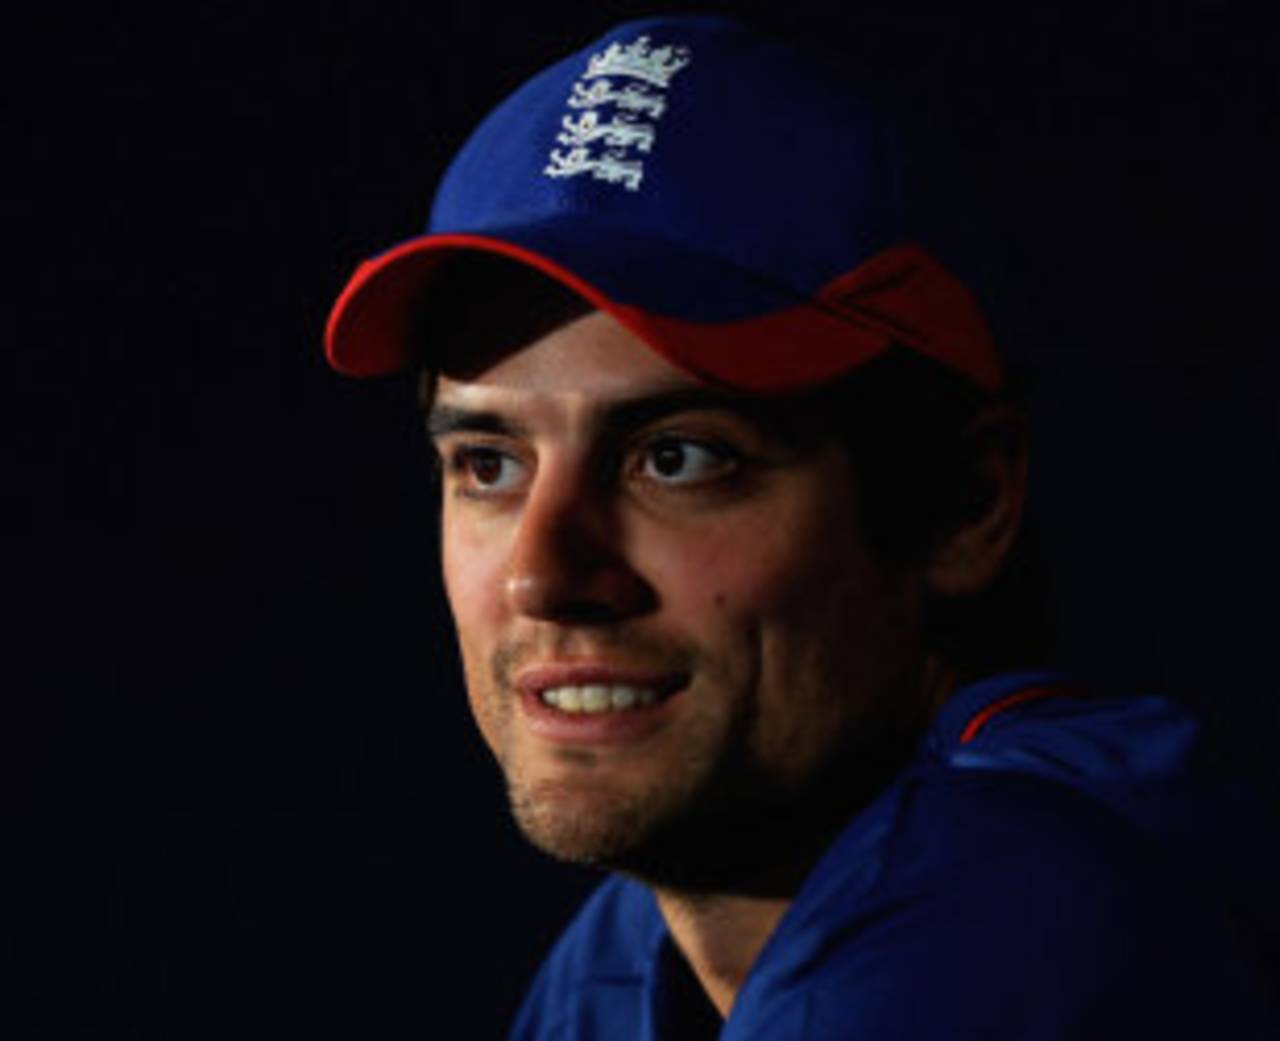 Alastair Cook chats with the media, Birmingham, June 7, 2013